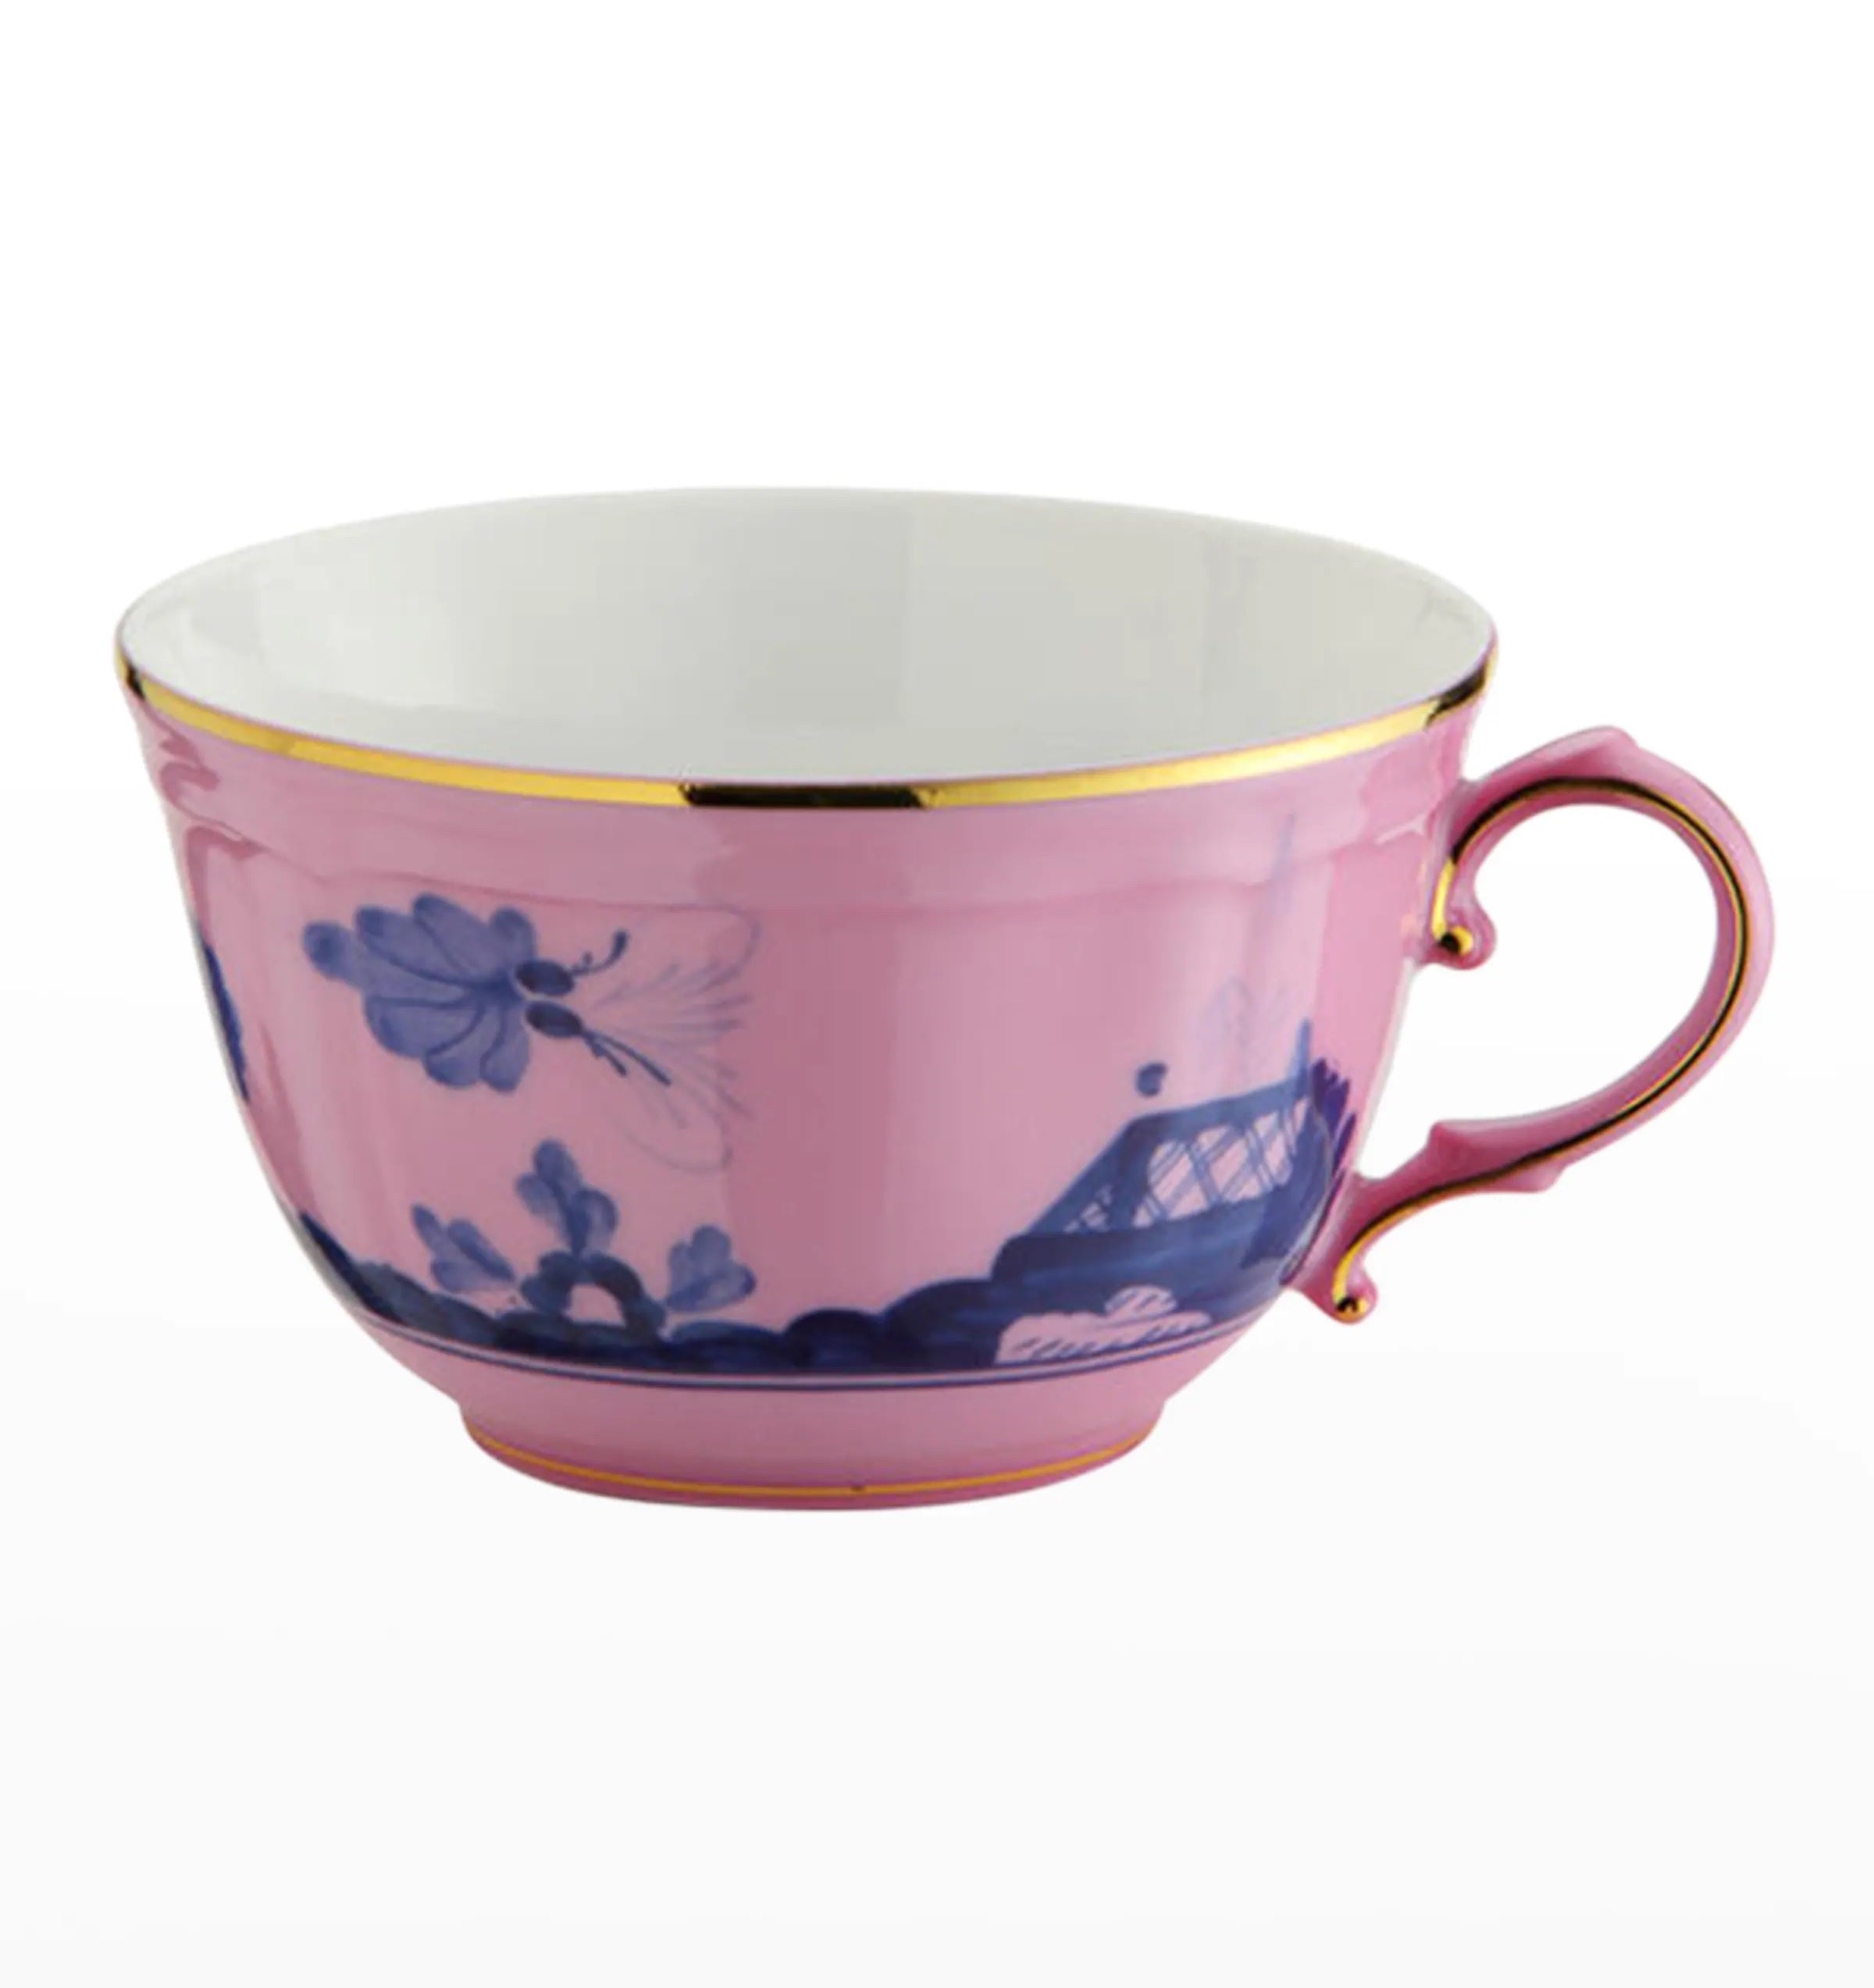 pink and navy teacup